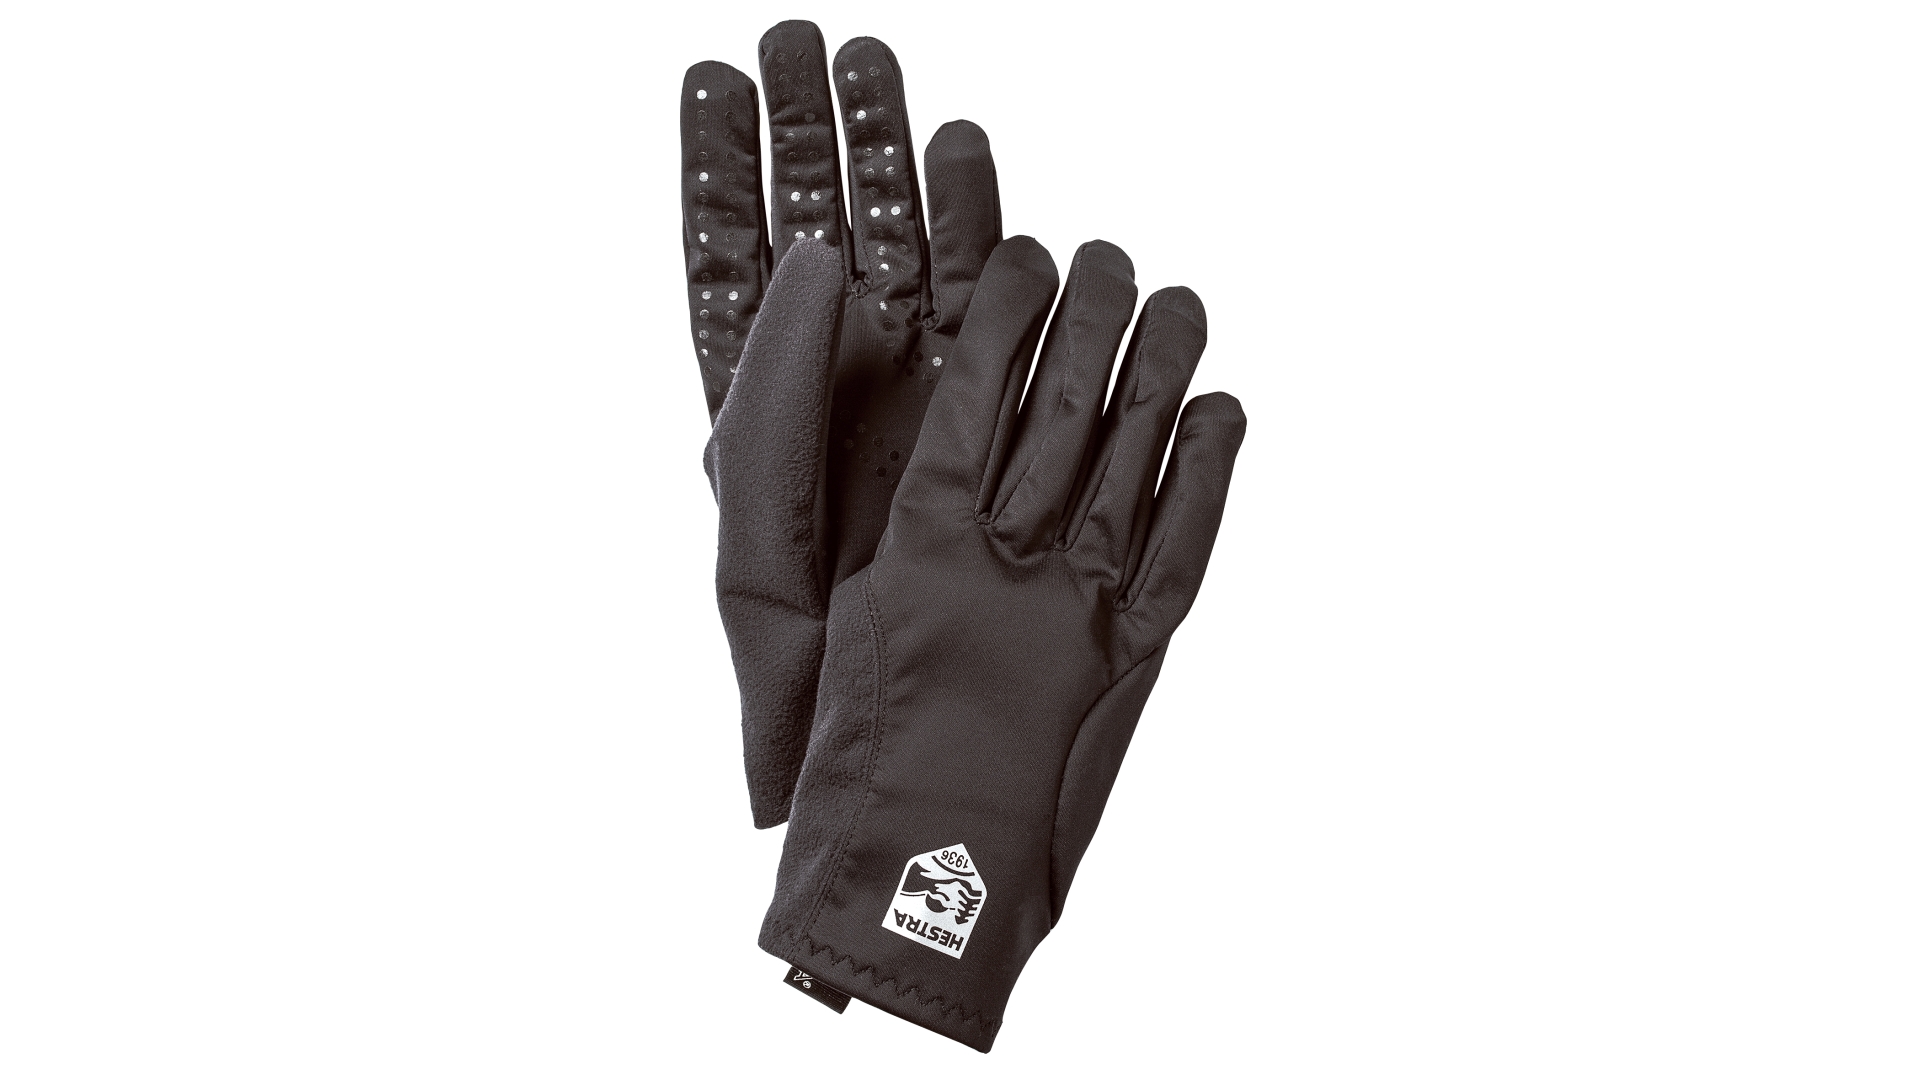 Hestra Runners All Weather gloves